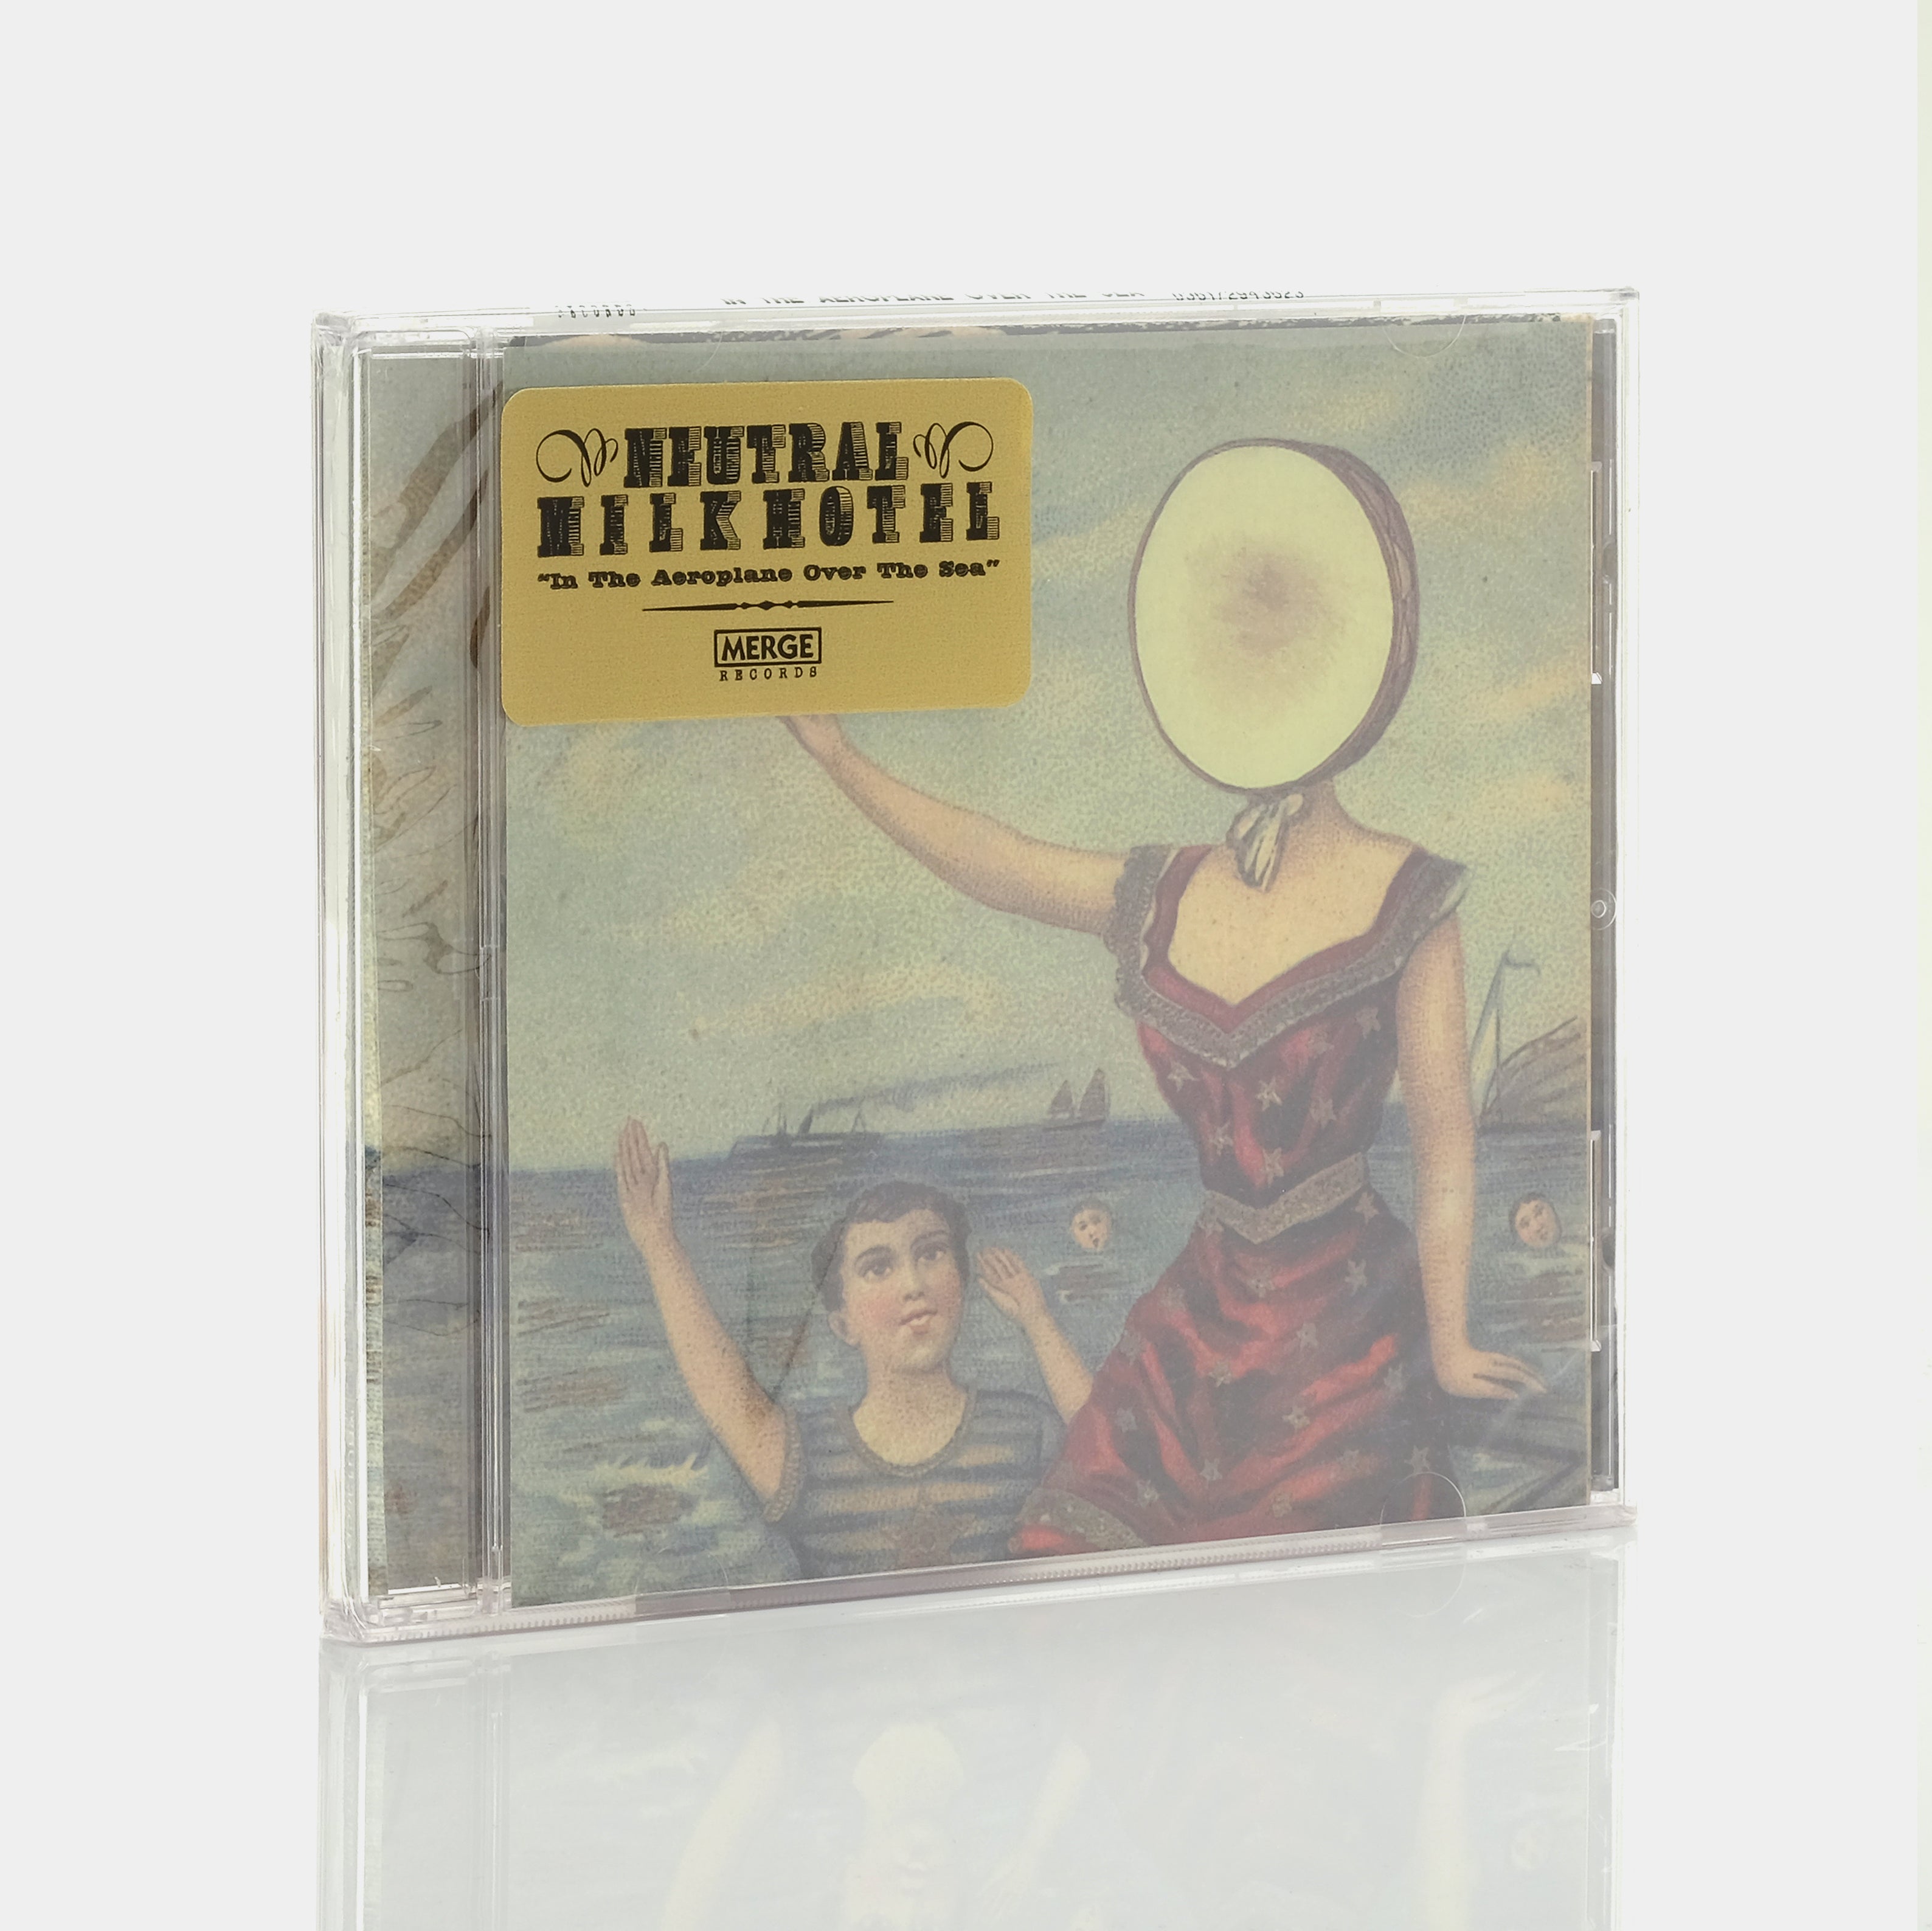 Neutral Milk Hotel - In The Aeroplane Over The Sea CD